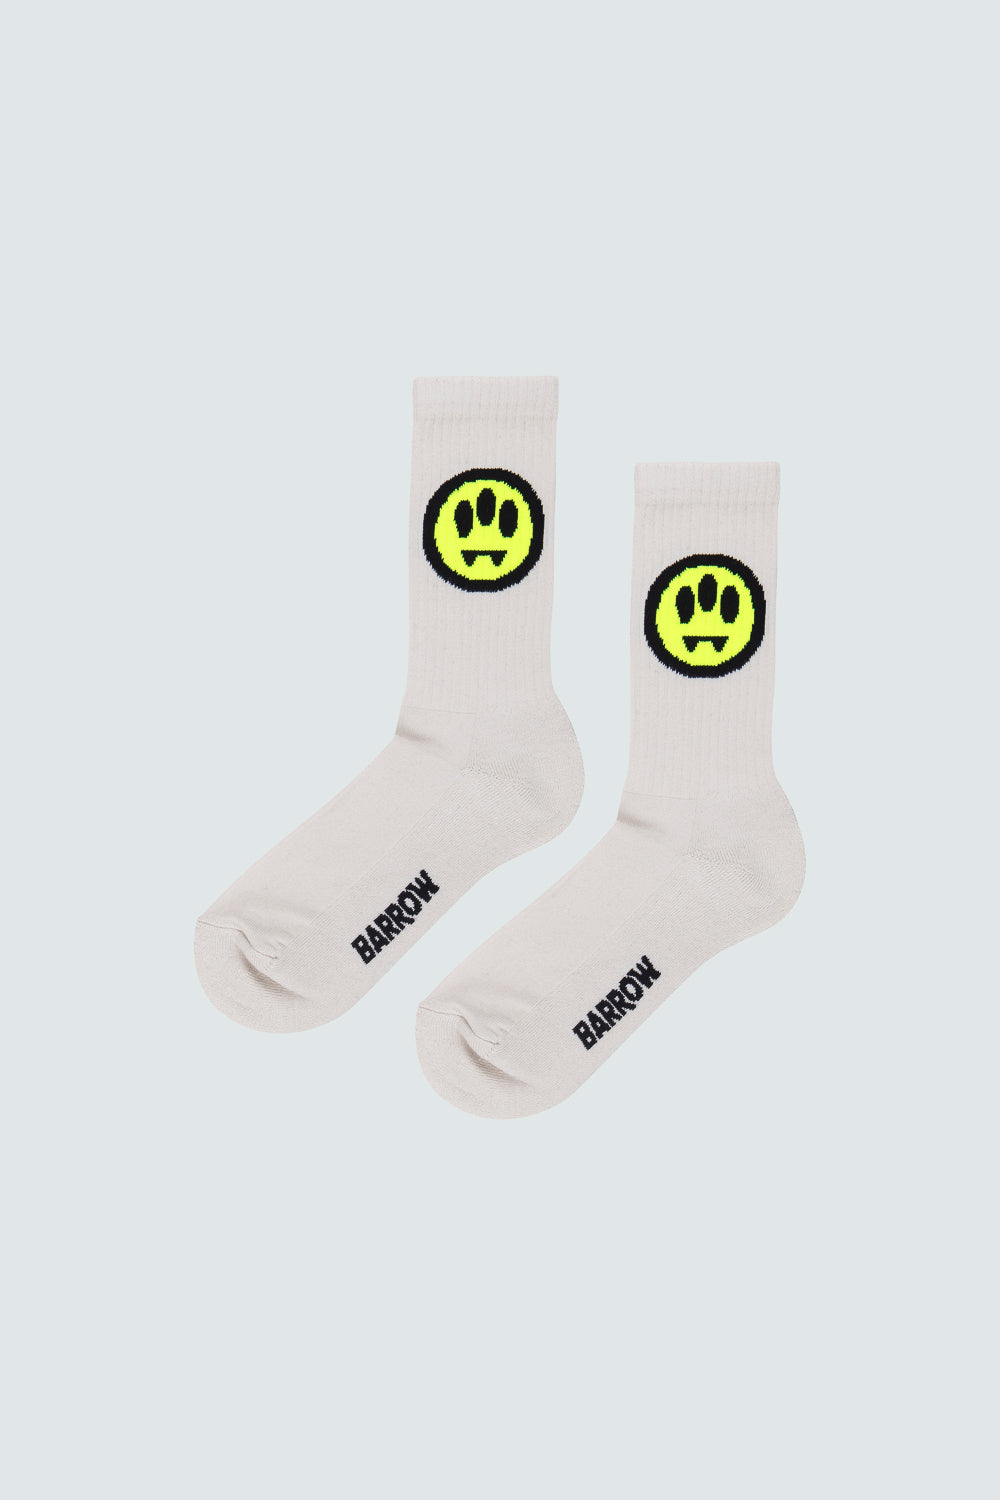 Buy the Barrow Socks in Off White at Intro. Spend £50 for free UK delivery. Official stockists. We ship worldwide.